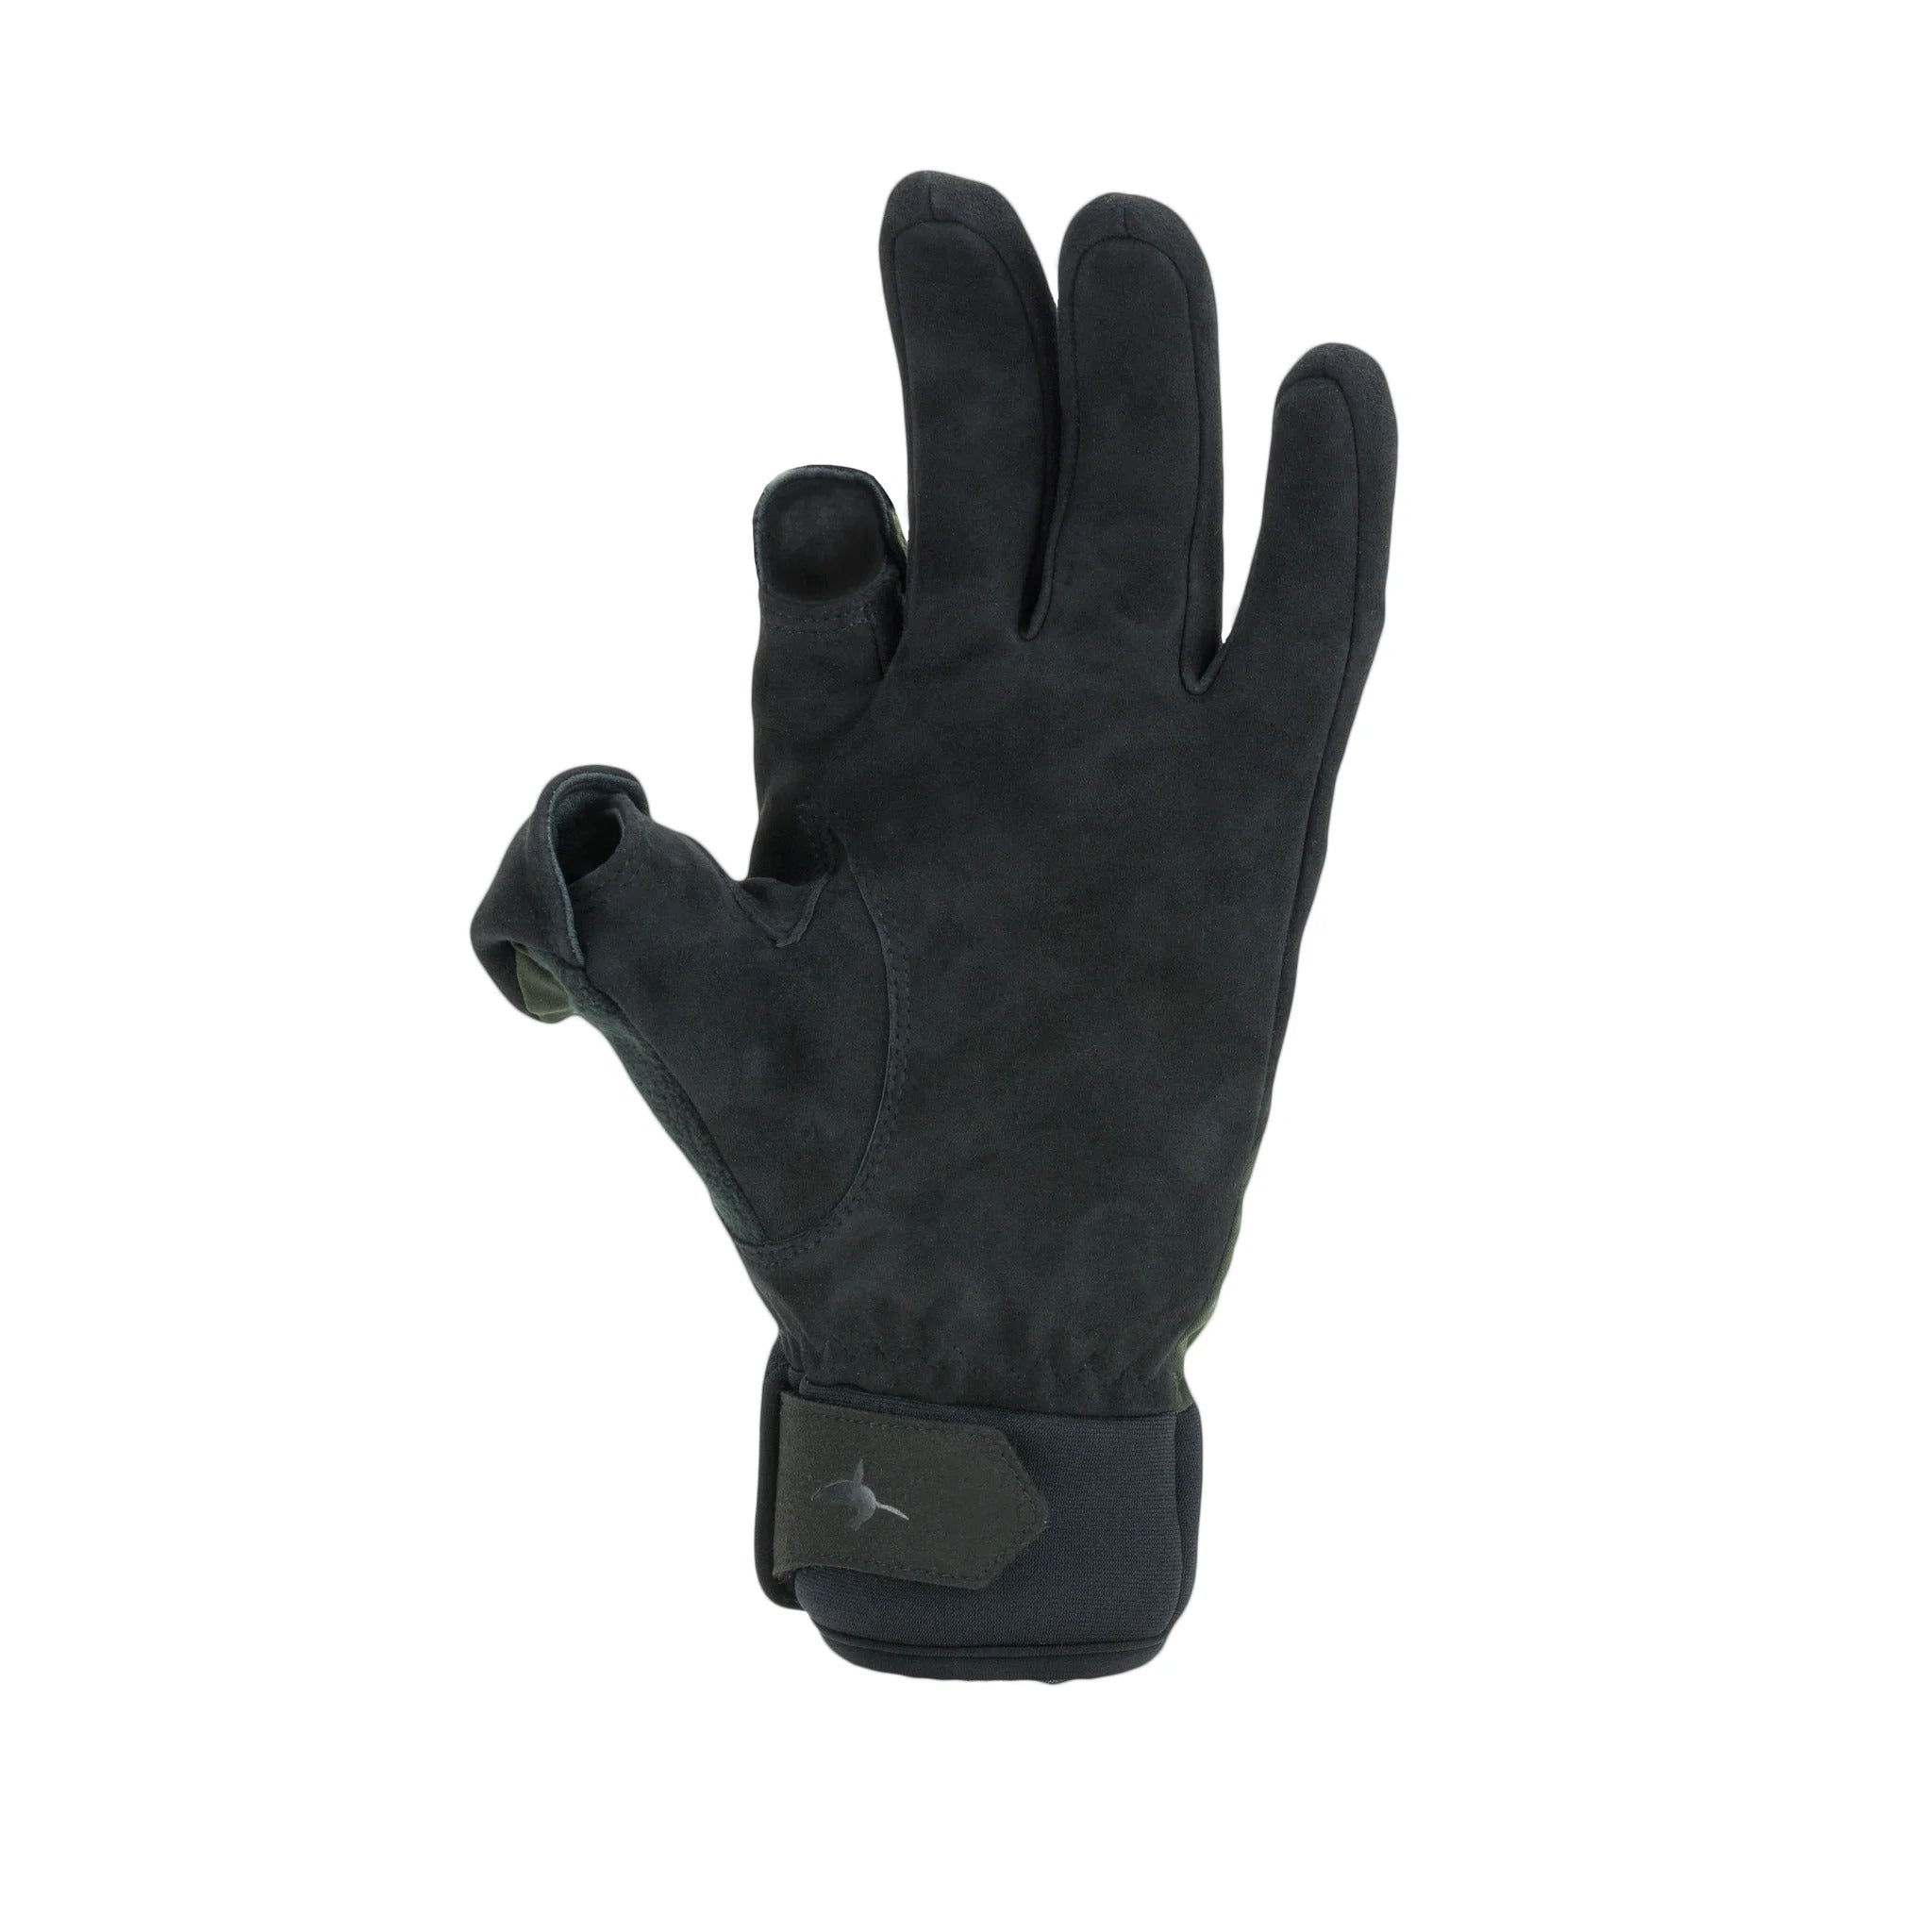 SealSkinz Waterproof All Weather Sporting Gloves - Olive